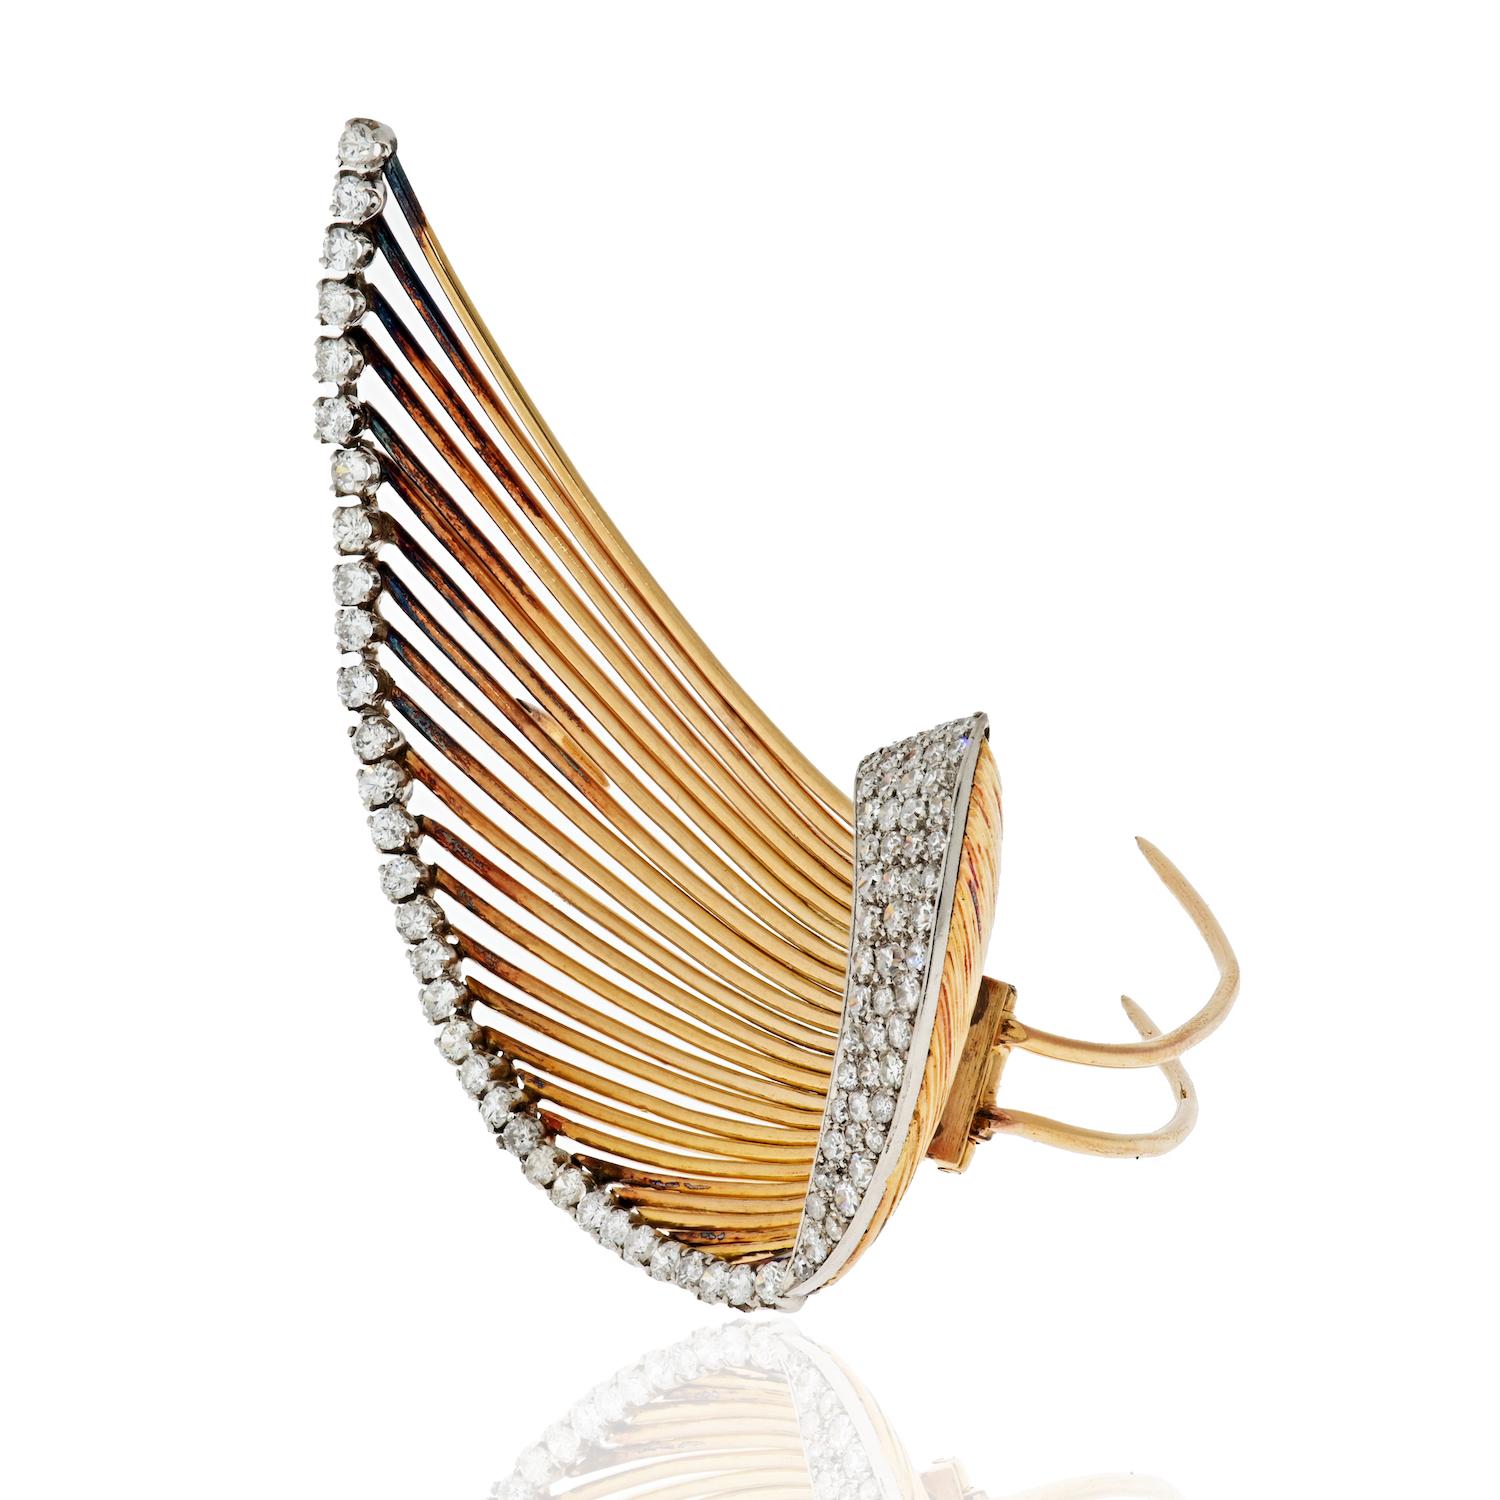 Brooch is designed as a stylized swoosh or leaf comprised of high polished yellow gold wires. 
Featuring single-cut round diamonds at the tip of every wire and pavè diamonds on the bottom element. 
Length: 2.5 inches
Diamond Weight: 3.00cts 
Circa: